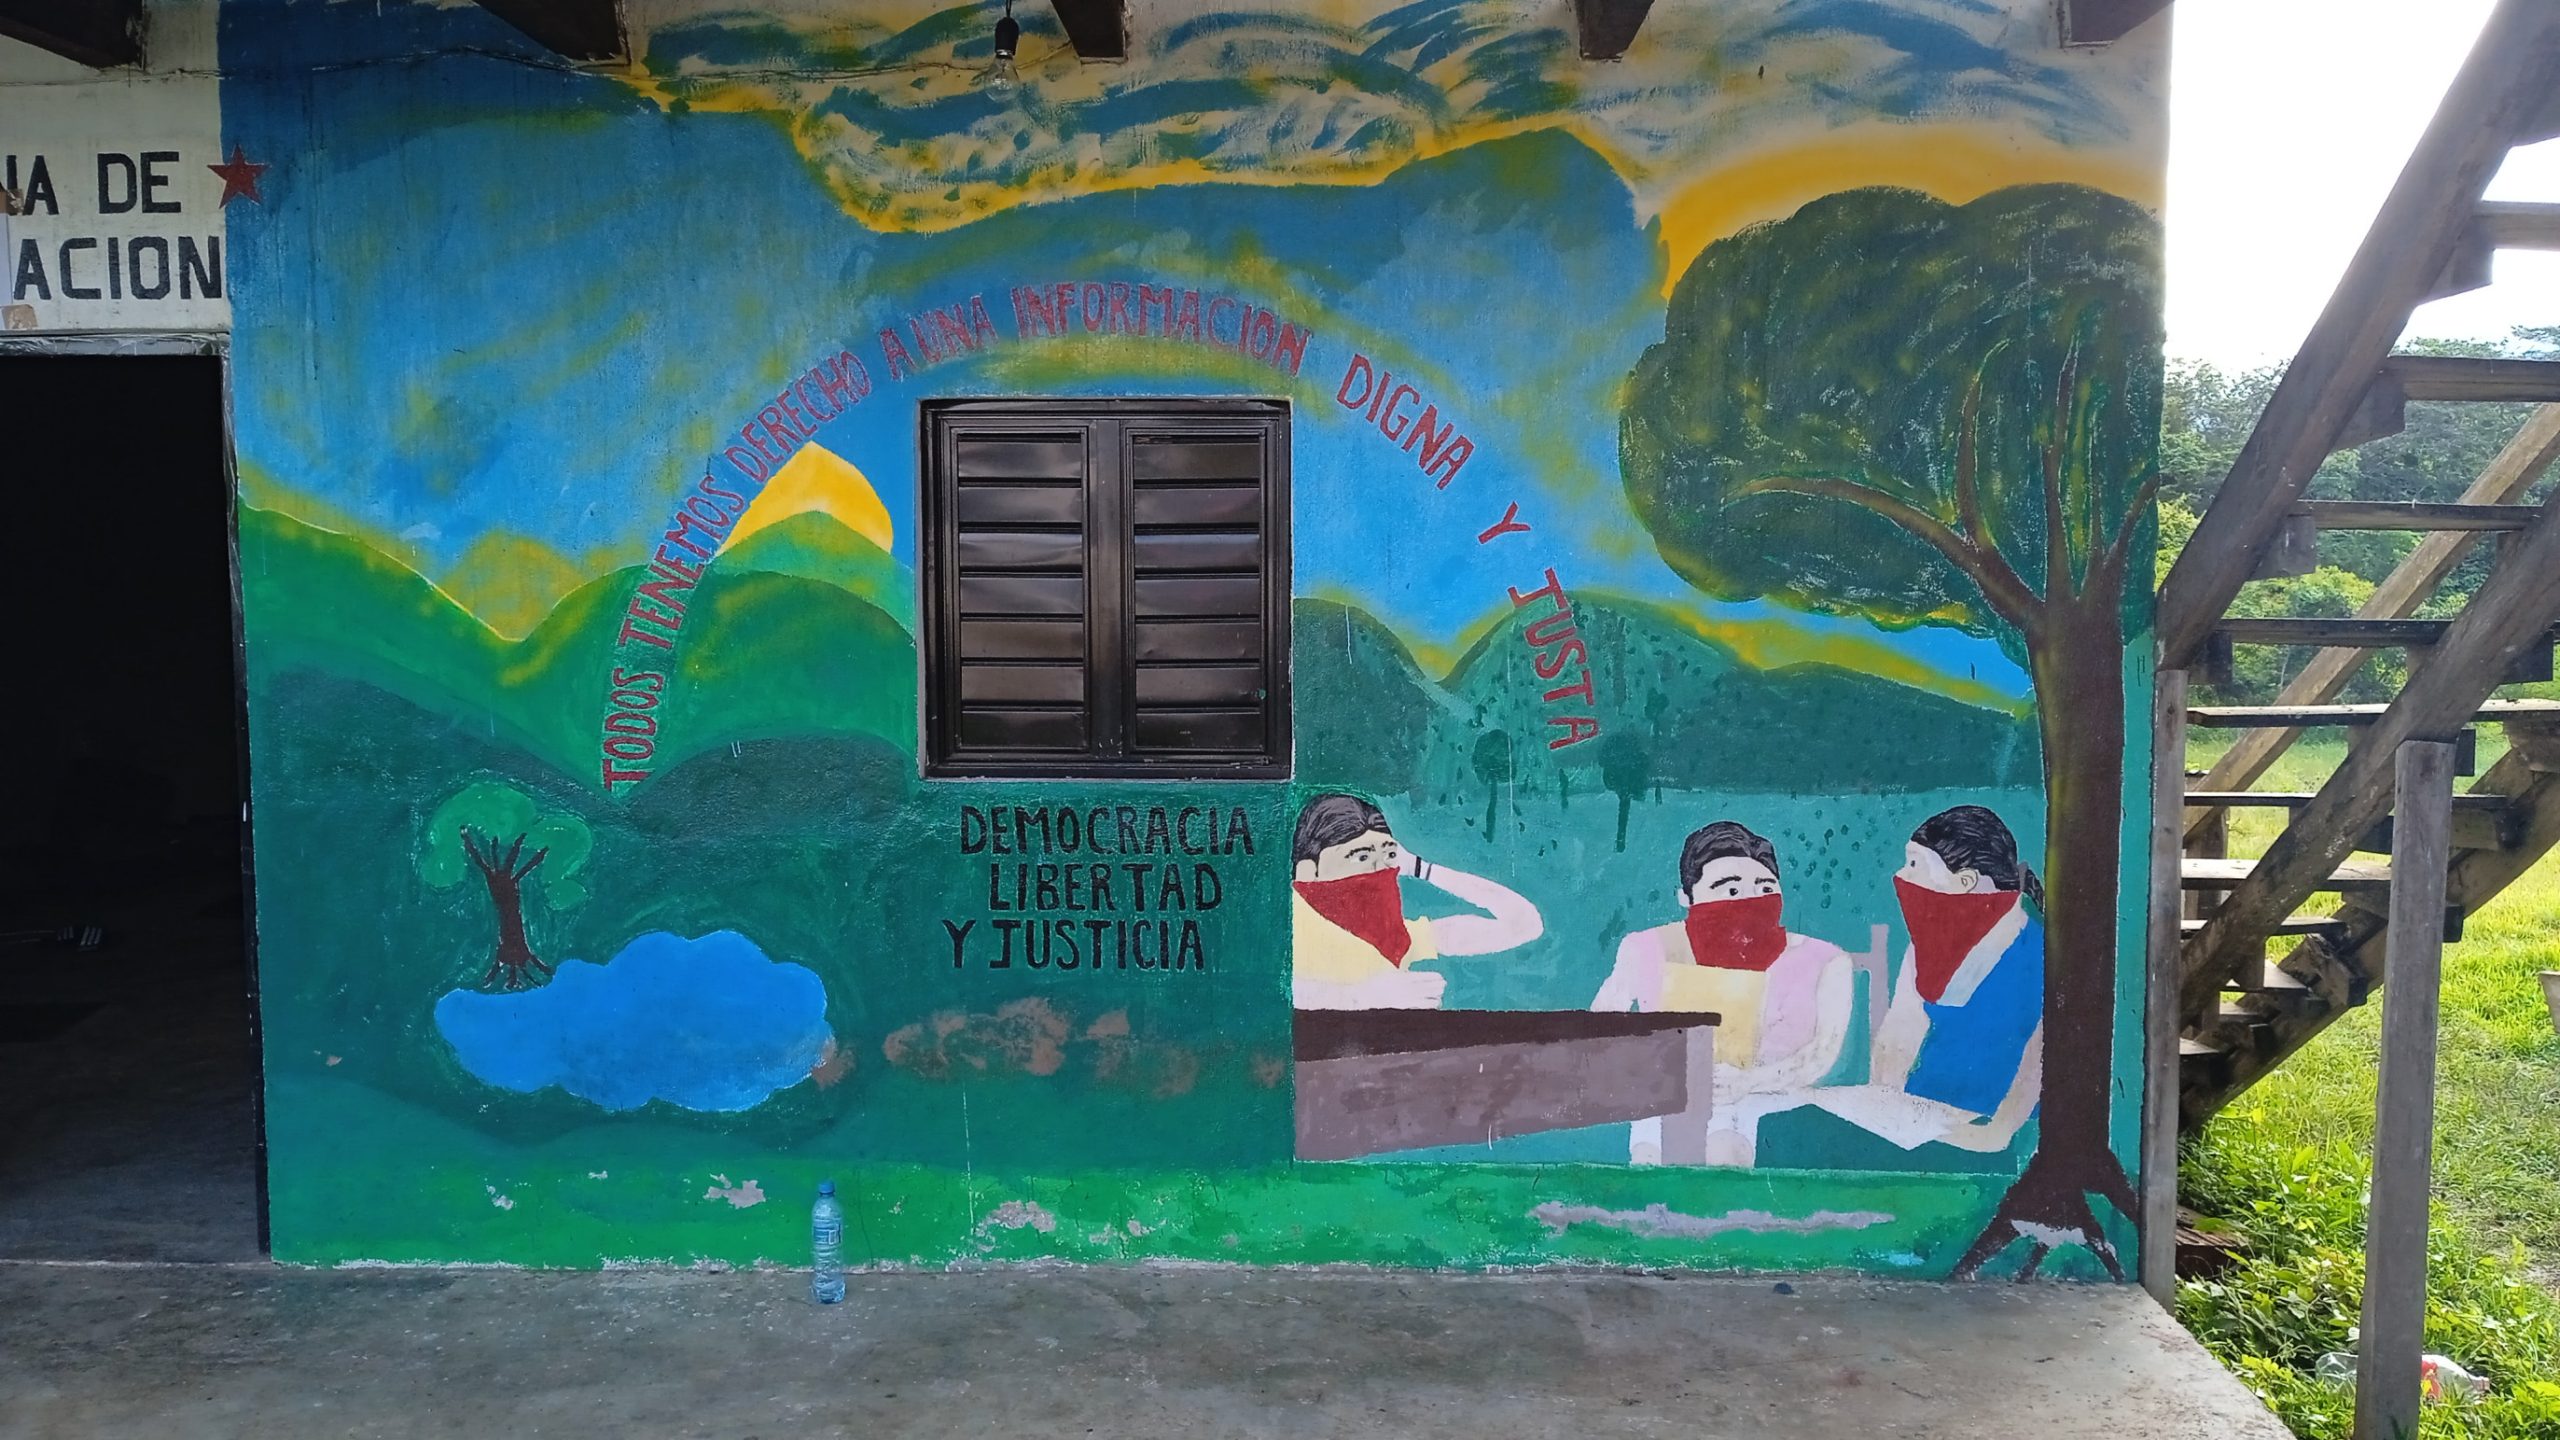 Mural showing a forest and three Zapatistas whose faces are covered